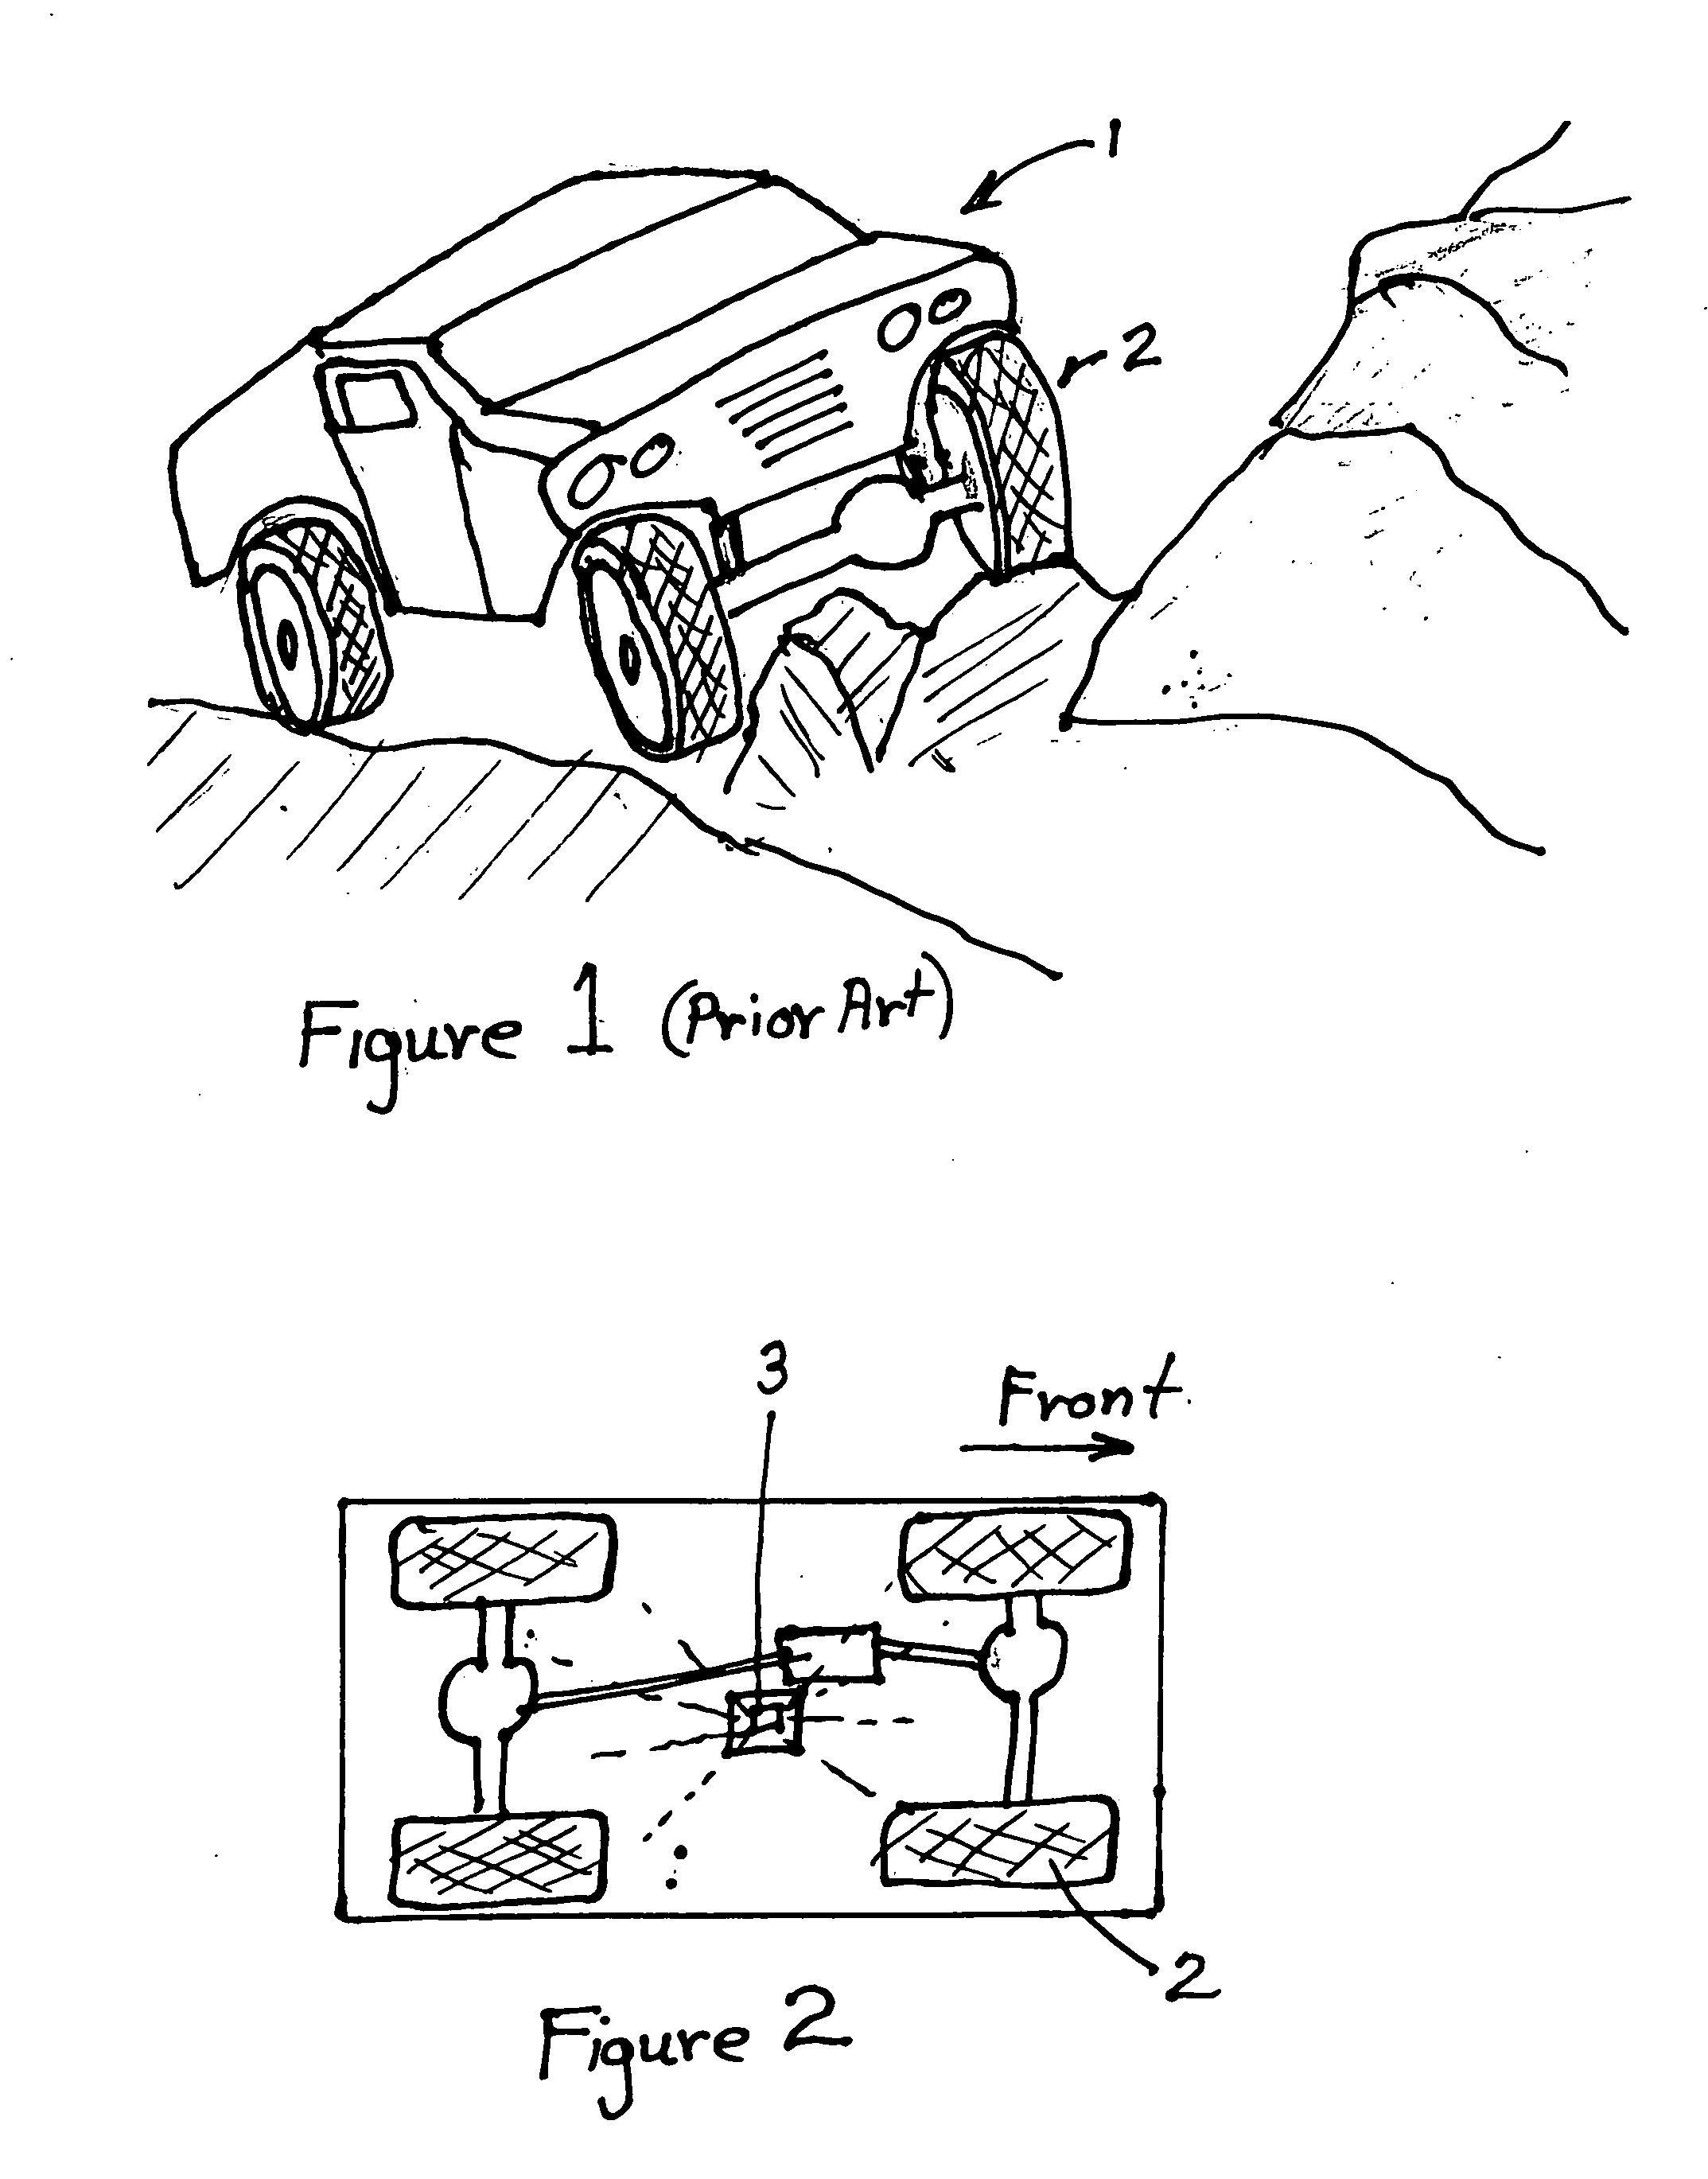 Off road vehicle vision enhancement system